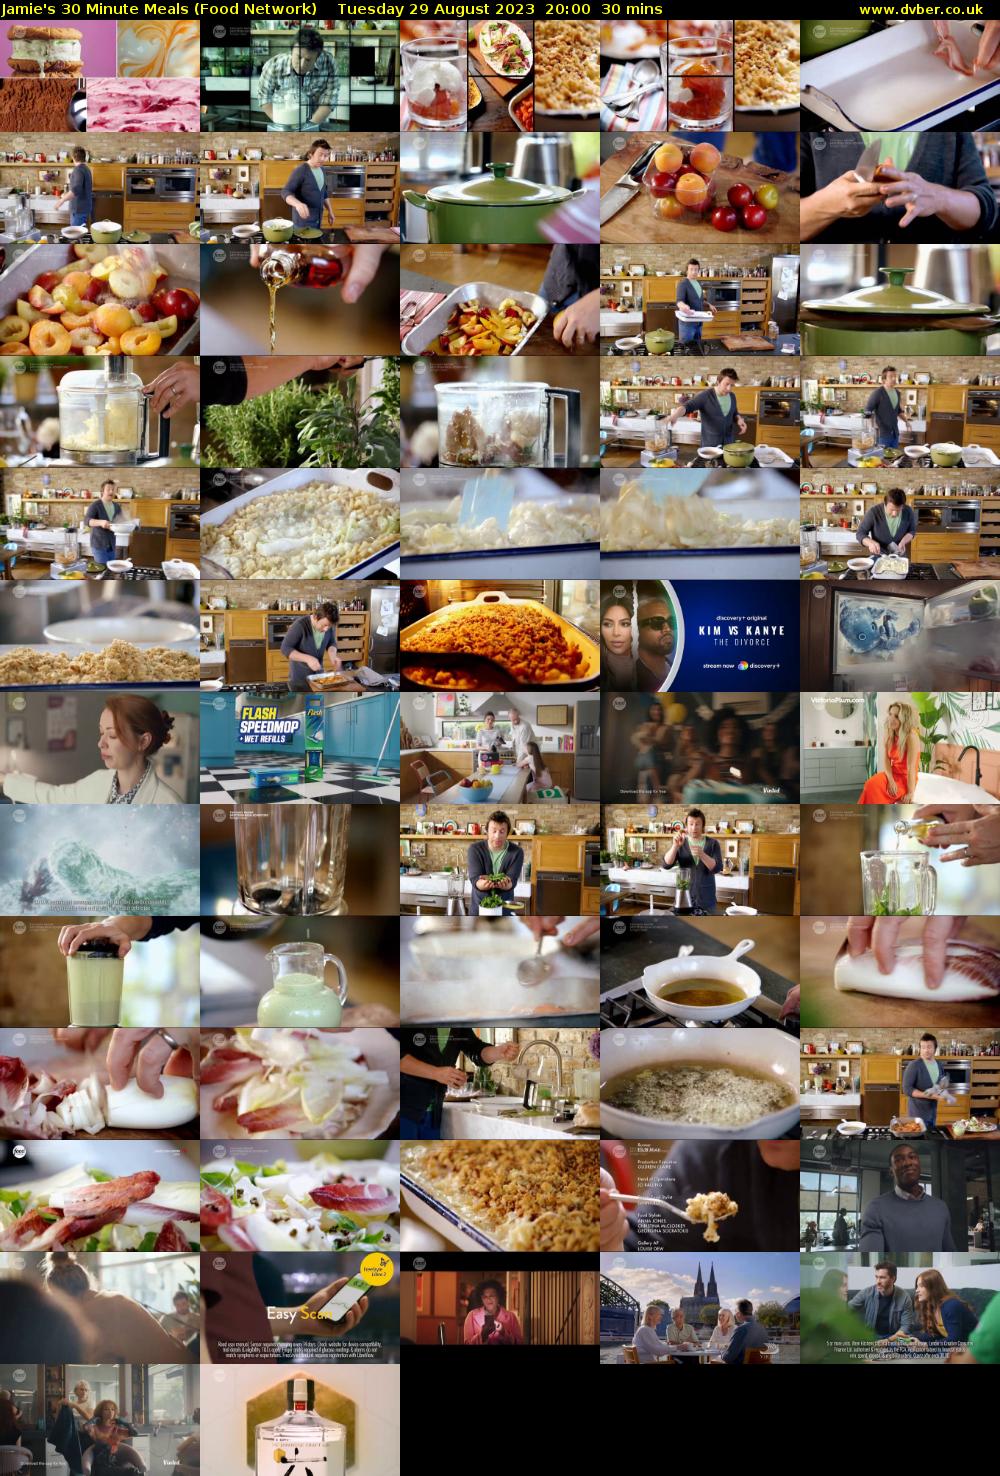 Jamie's 30 Minute Meals (Food Network) Tuesday 29 August 2023 20:00 - 20:30